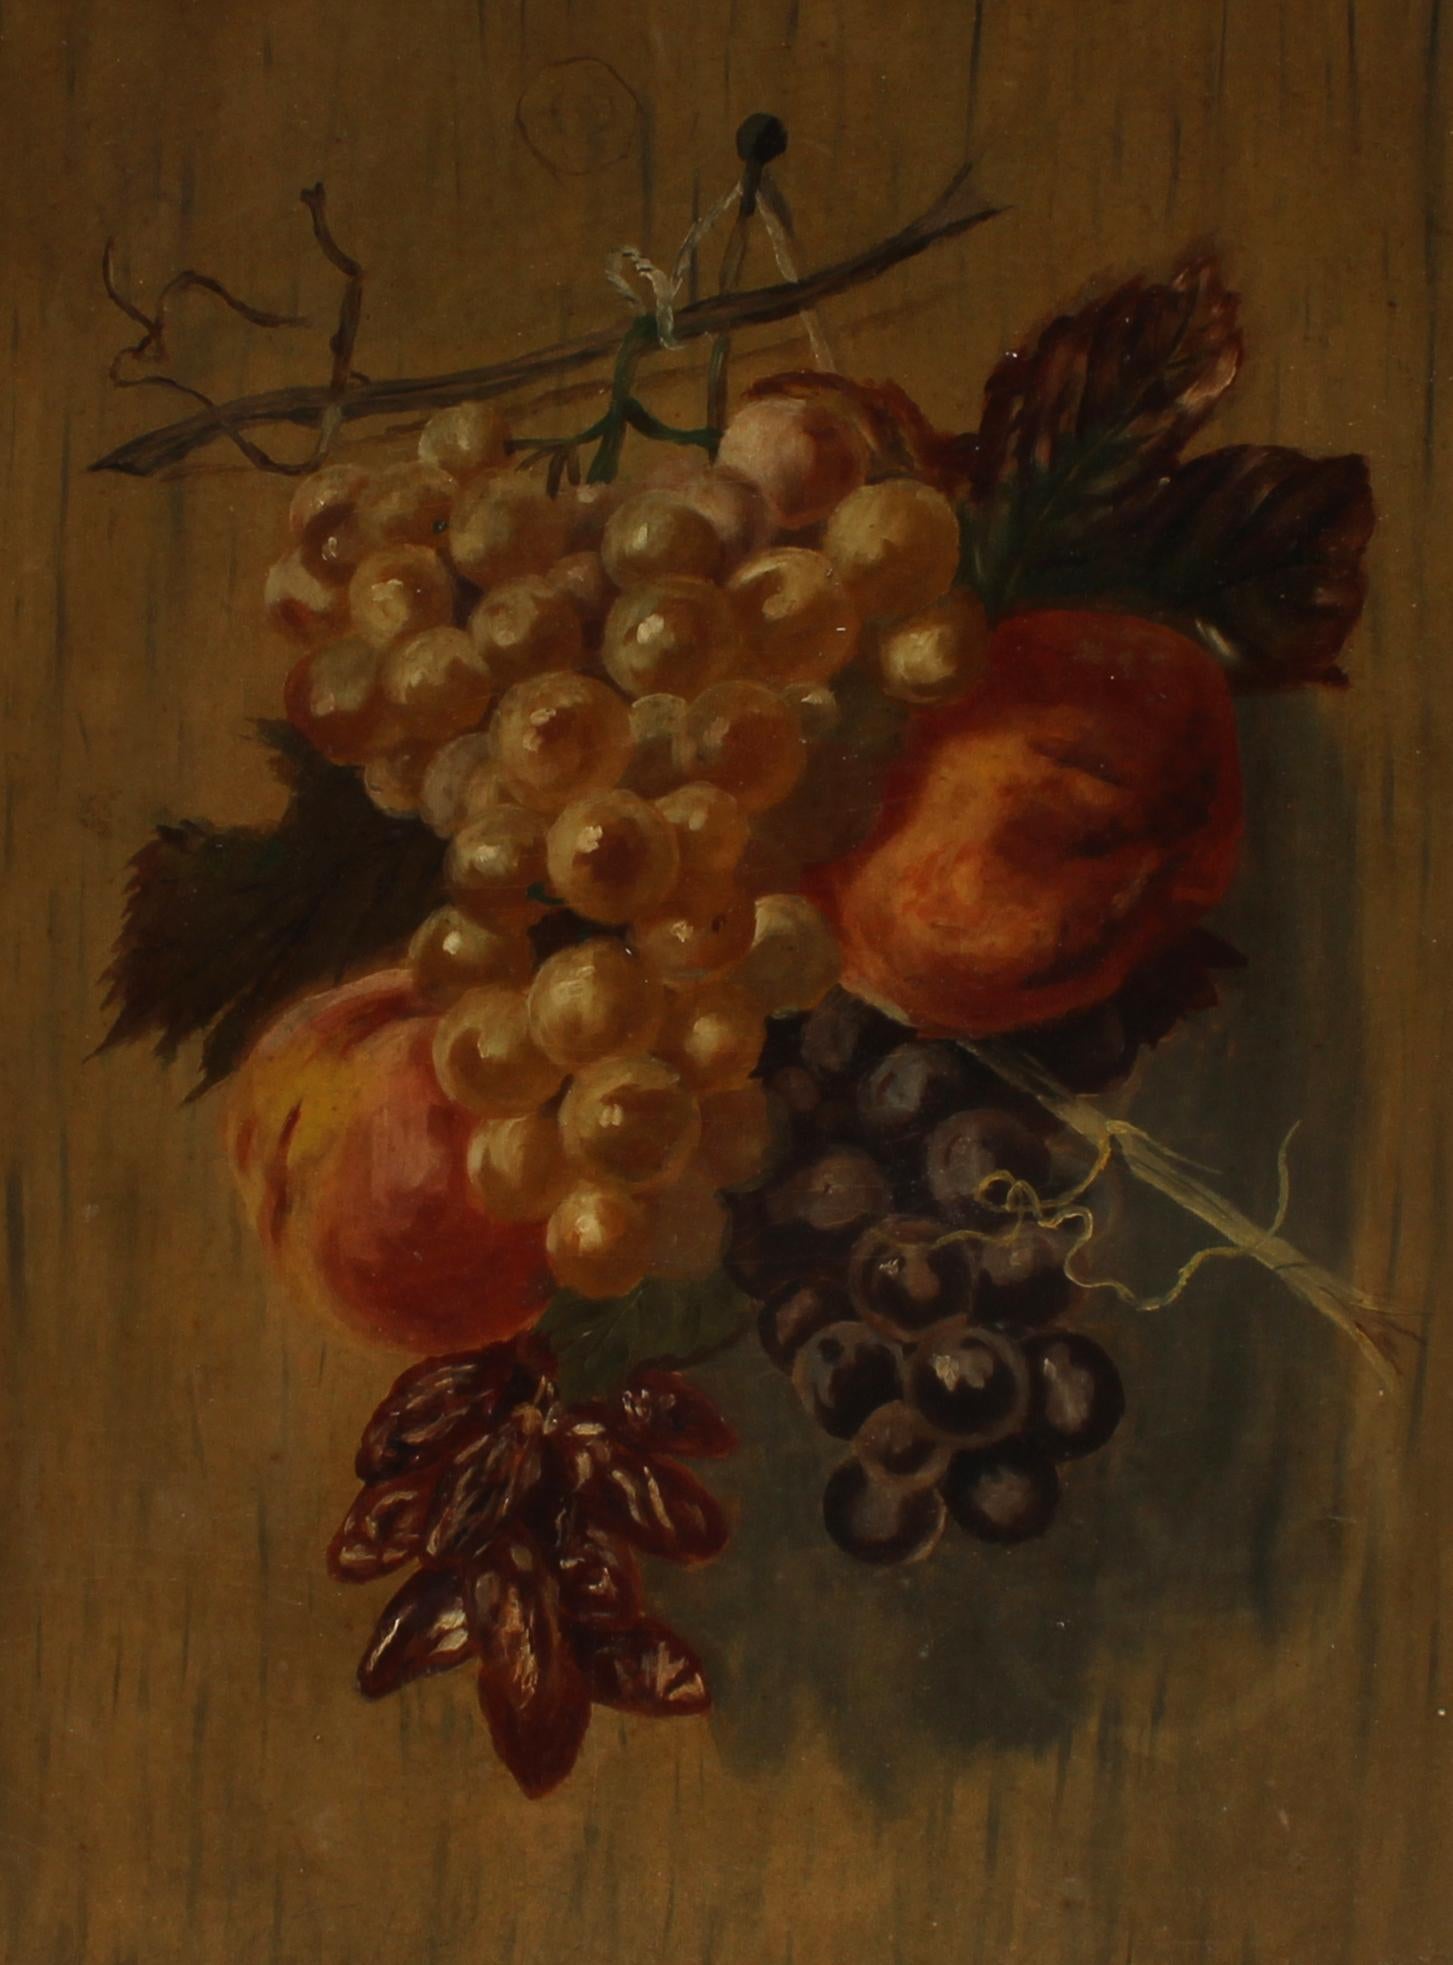 Antique American still life oil painting of hanging fruit and grapes. Oil on board. Framed